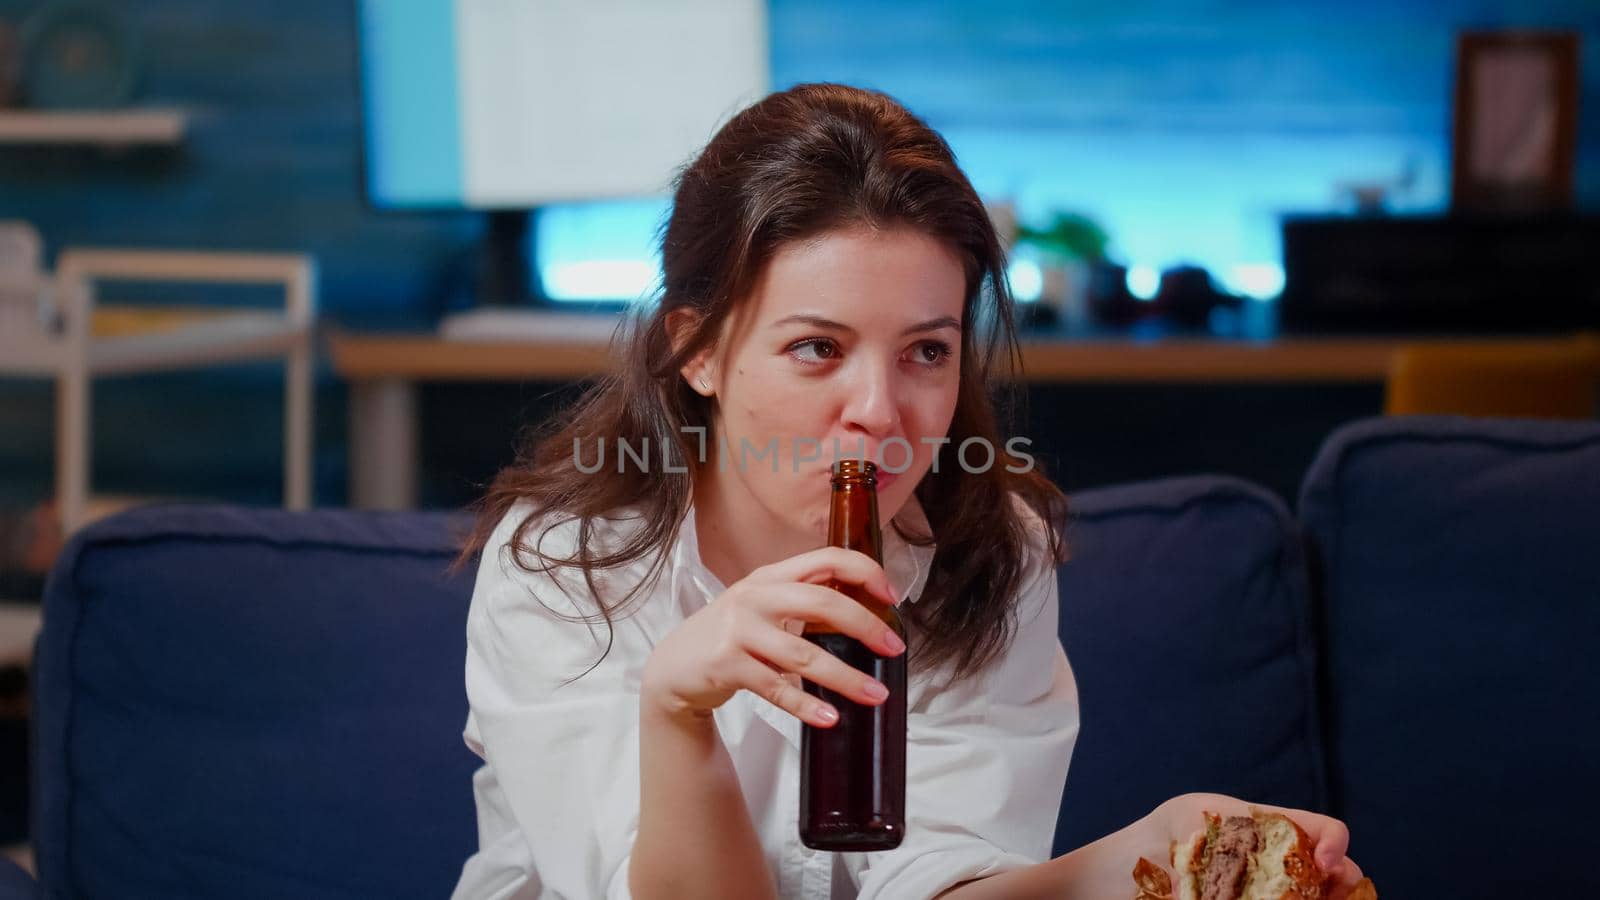 Young person with fast food meal watching television sitting on sofa after work. Caucasian woman eating hamburger and fries while drinking beer from bottle in living room at home.